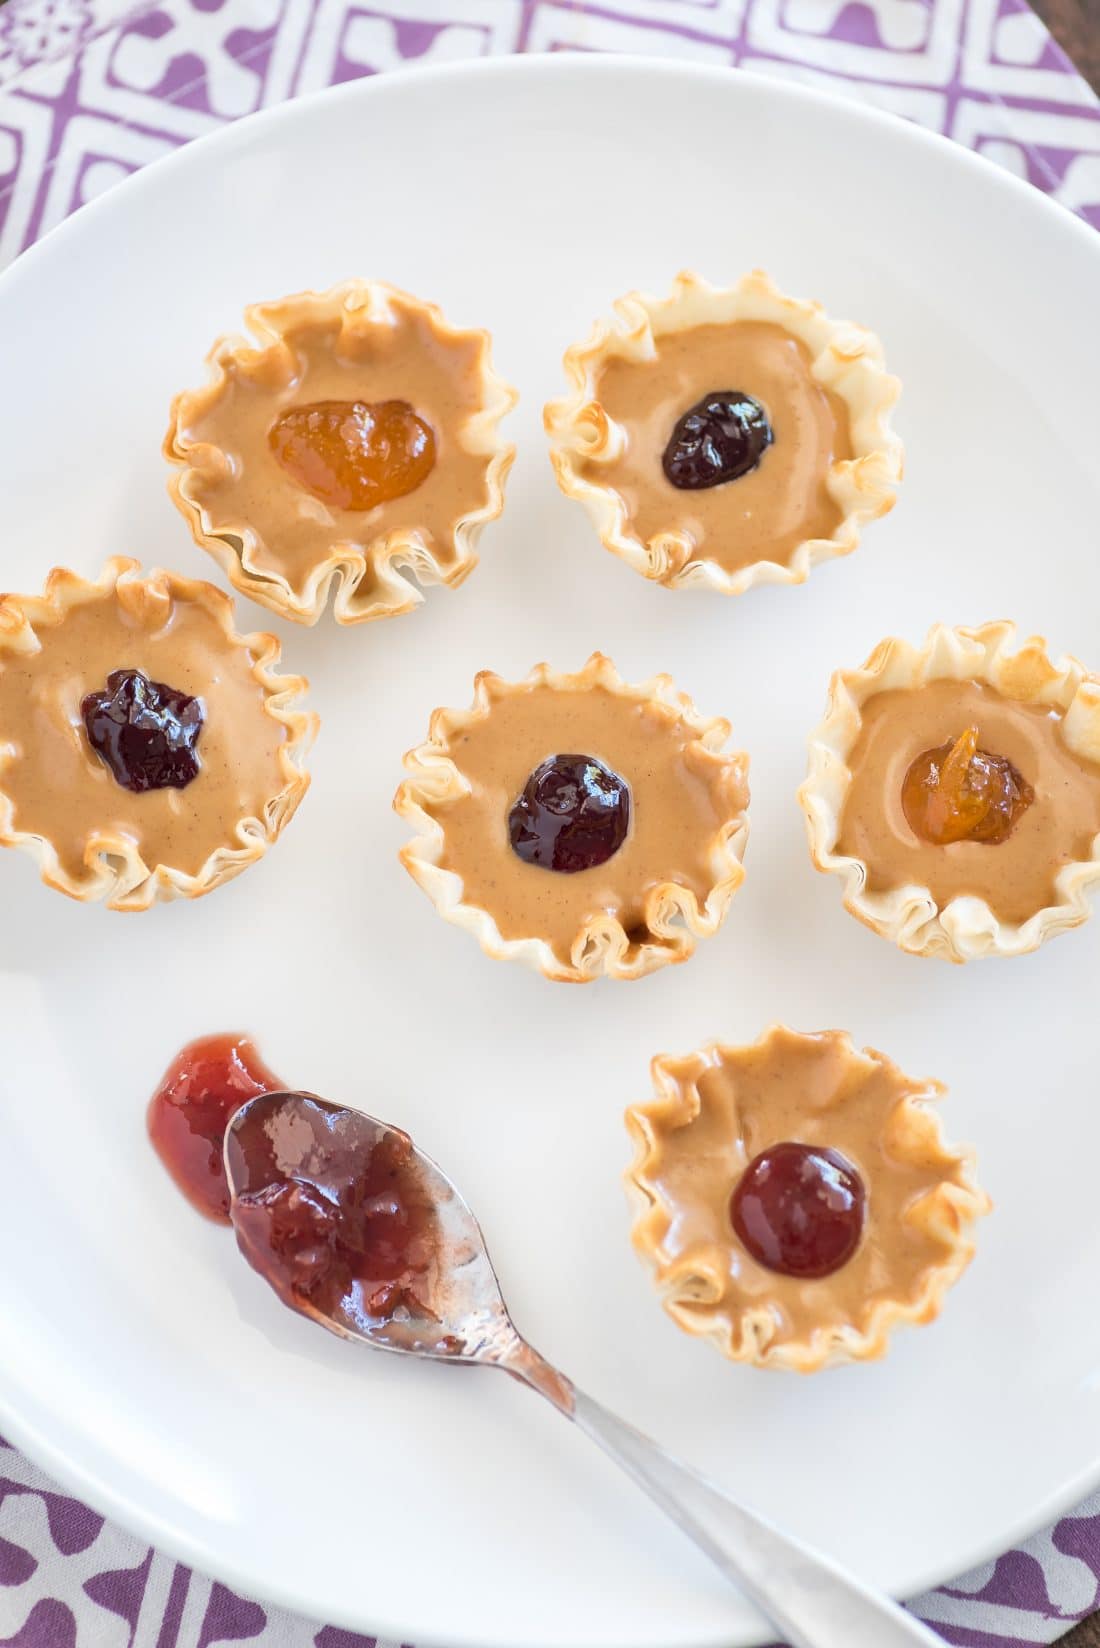 Peanut Butter Jelly Cups 